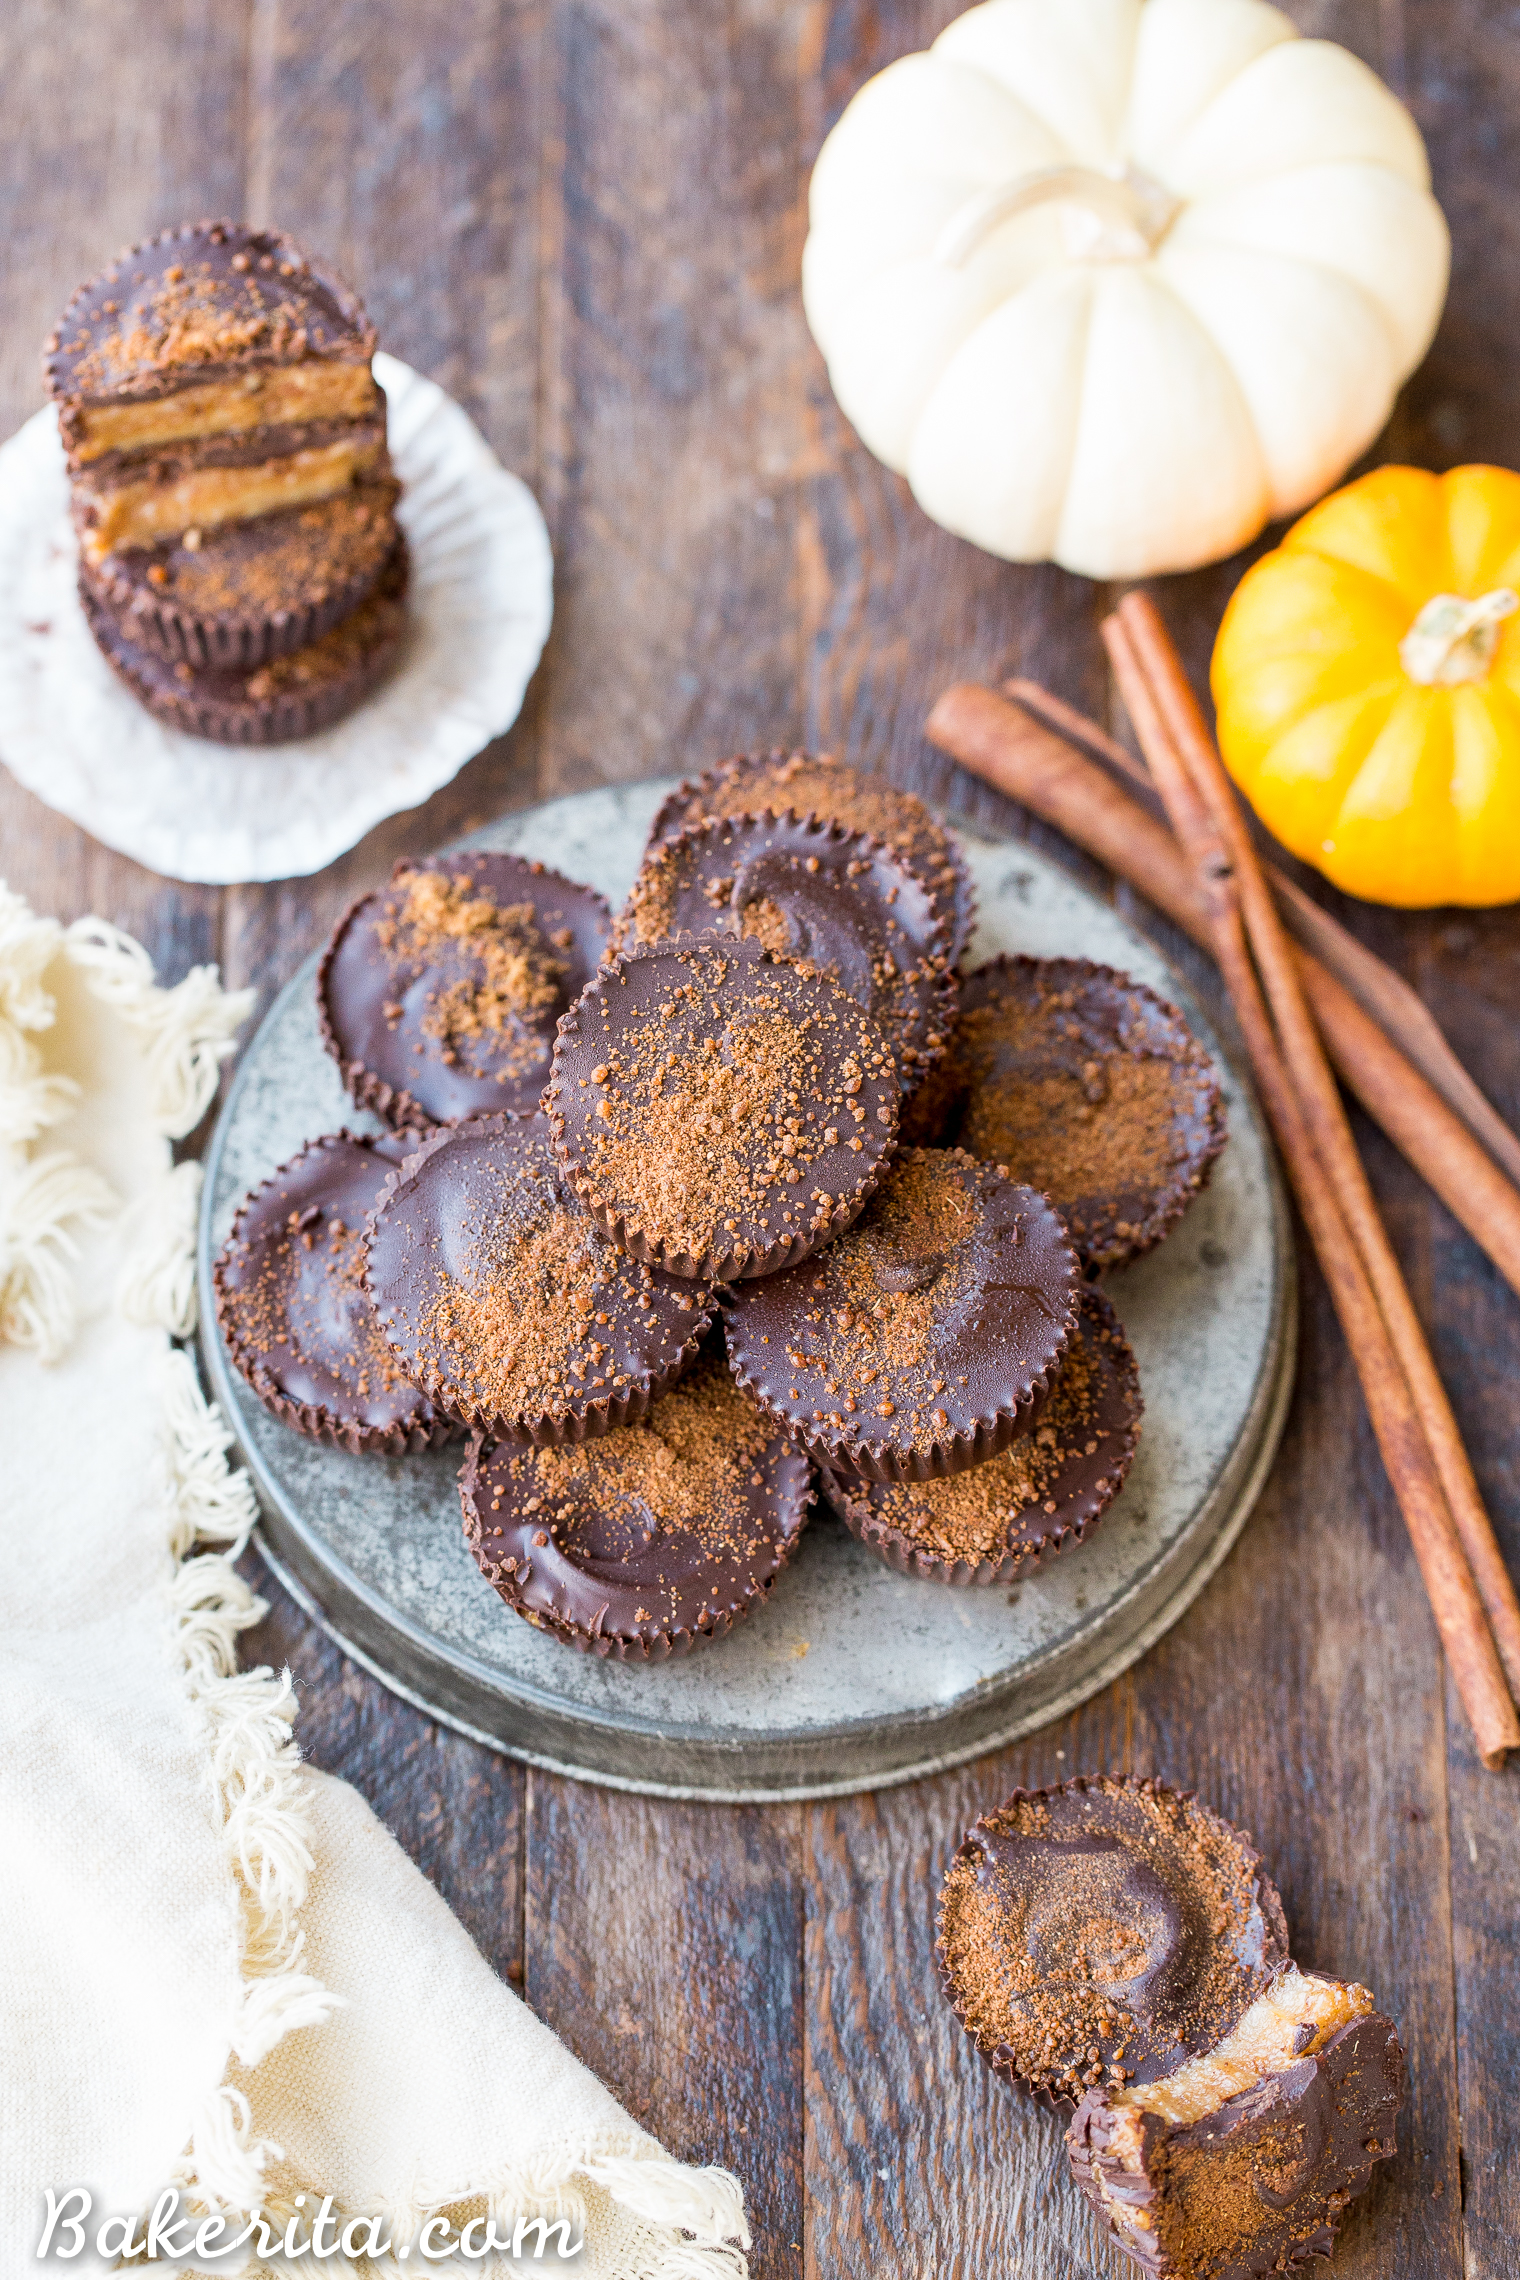 These Chocolate Pumpkin Spice Cups are a gooey, pumpkin spiced twist on the more traditional chocolate cups you know and love. You're going to go nuts for the spiced, caramel-like filling in these gluten free, paleo, and vegan pumpkin spice cups.